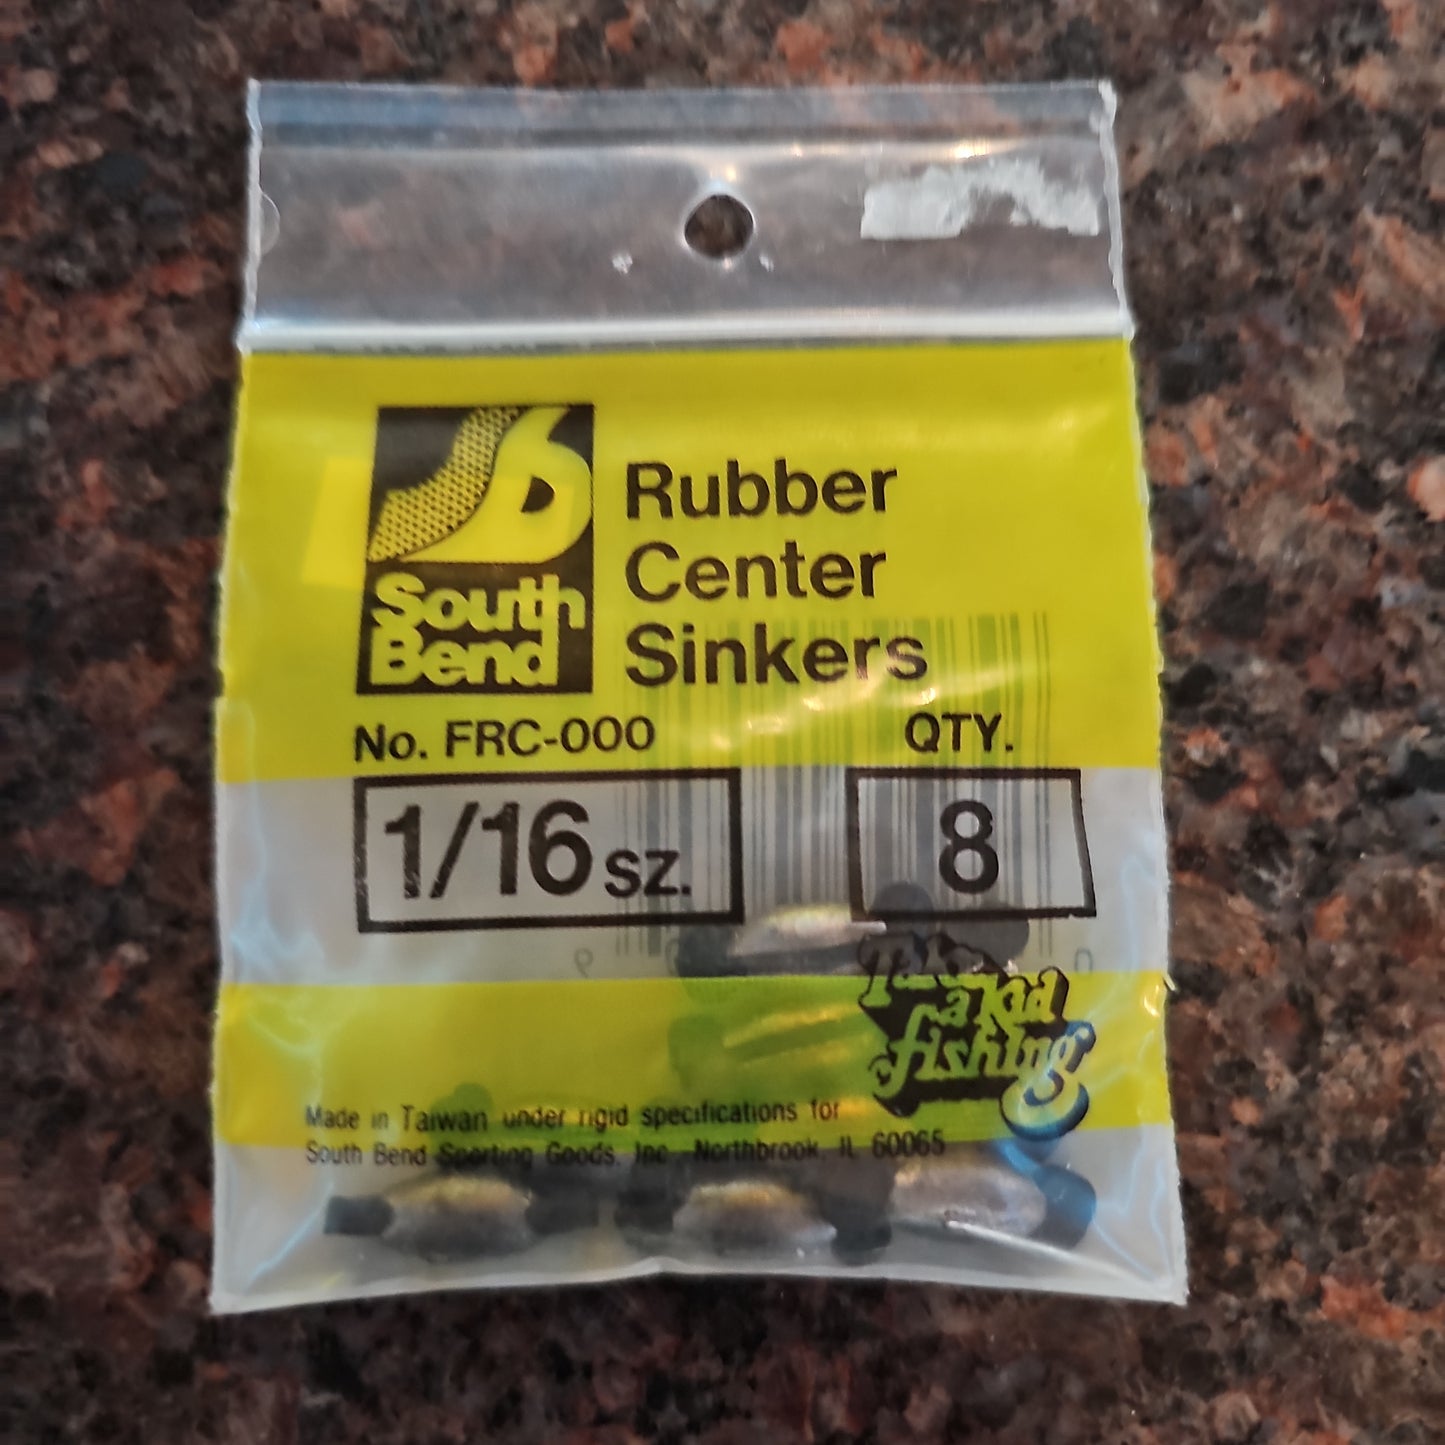 South Bend Rubber Center Sinkers